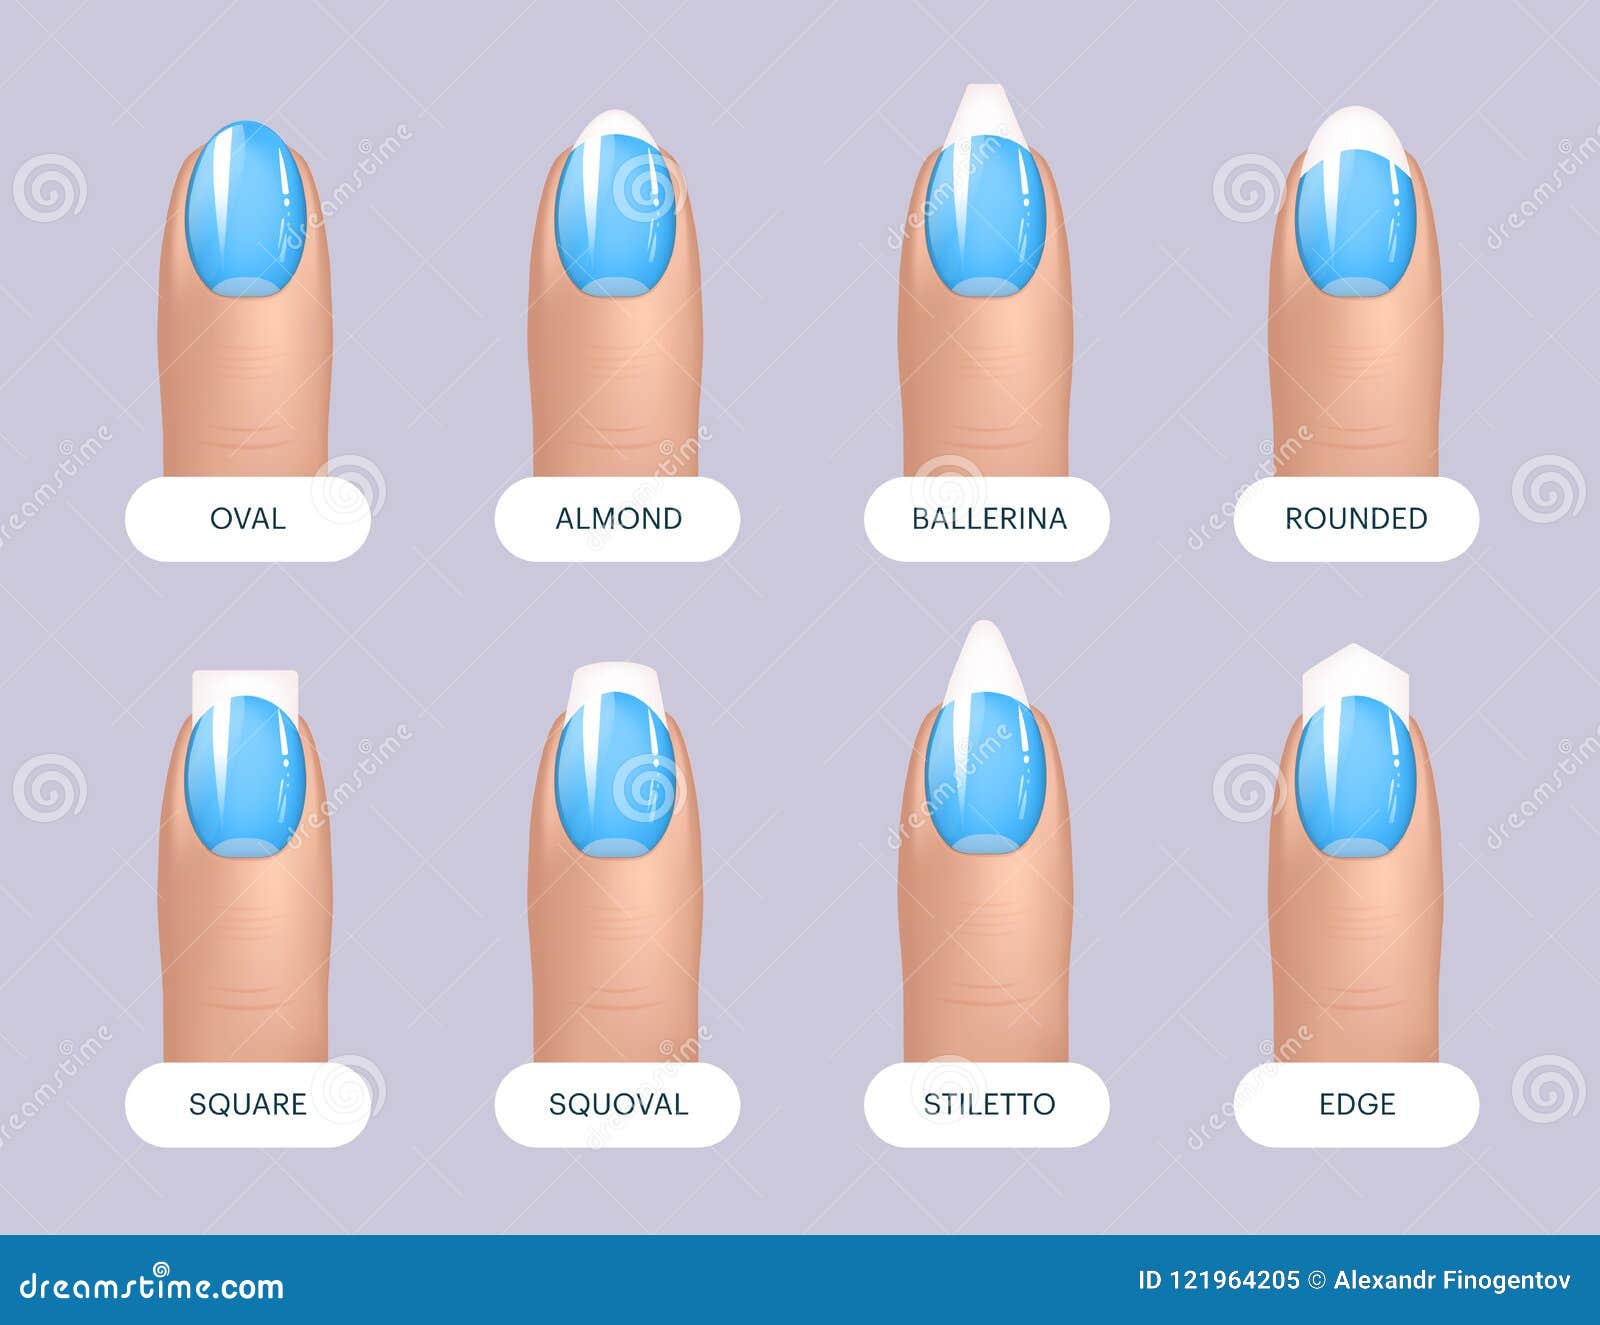 Set of Simple Realistic Blue Manicured Nails with Different Shapes ...